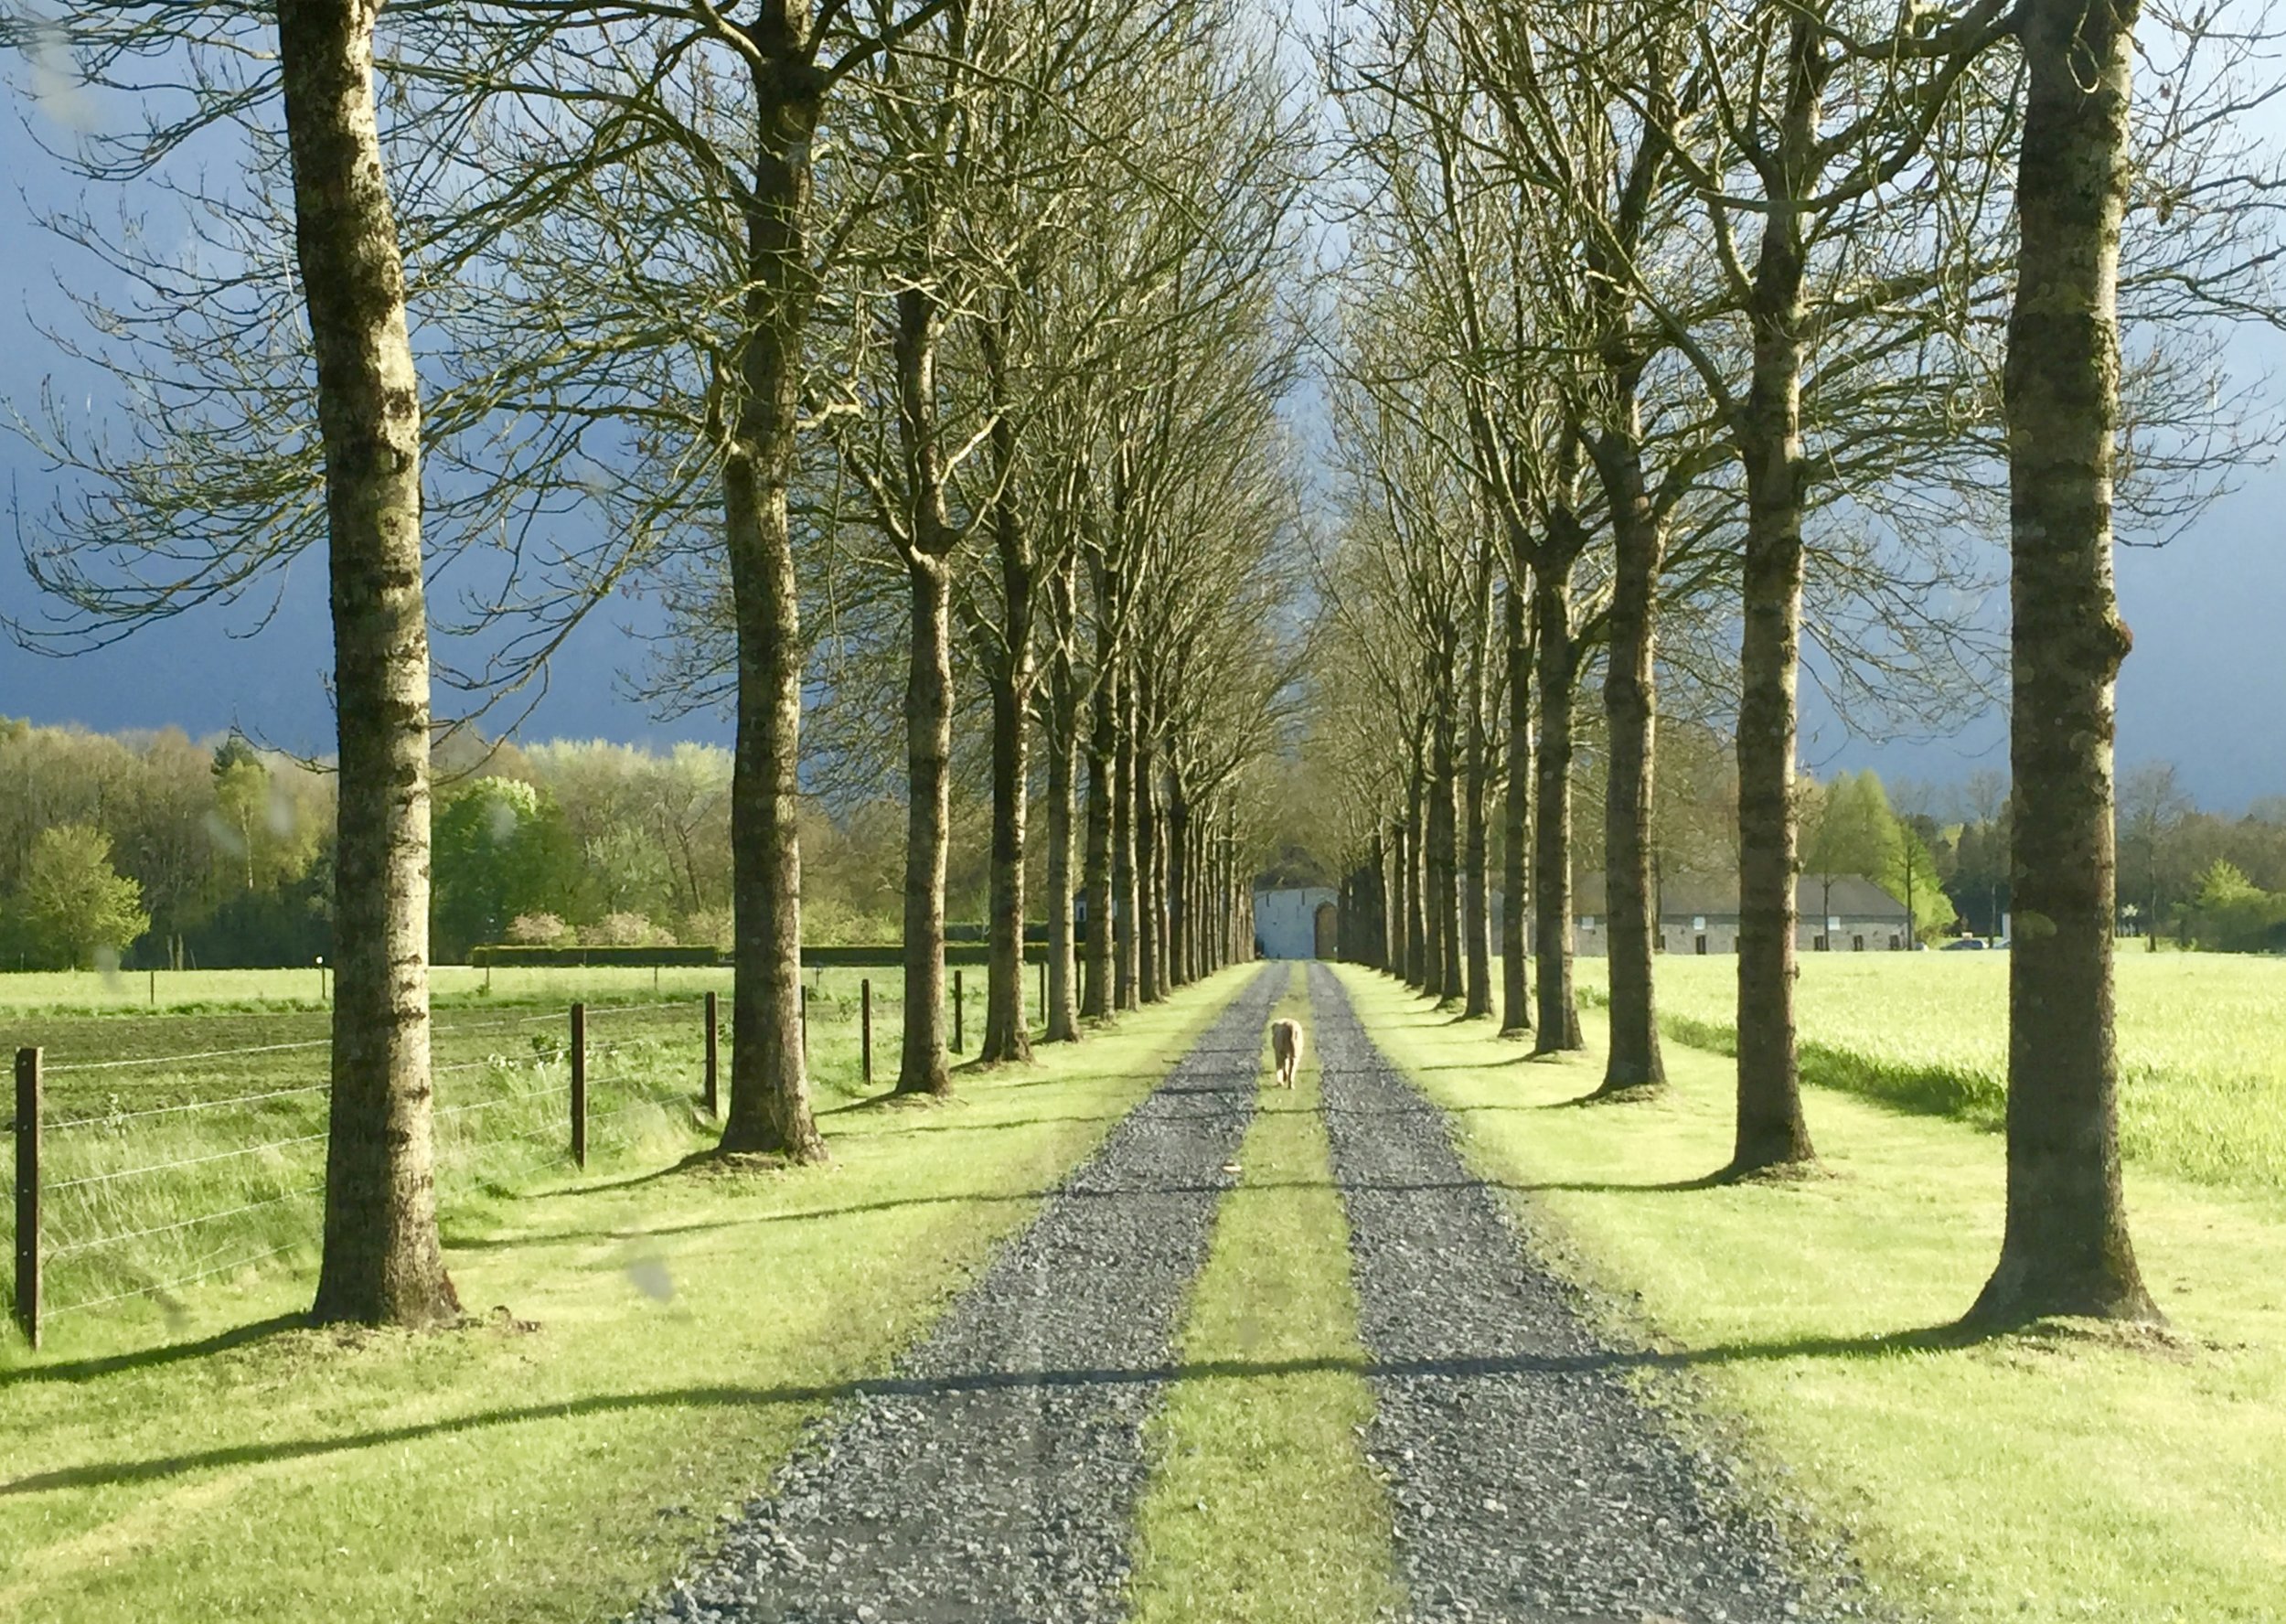   Scenery, history and beer    Backroads of Belgium    Get to know the less traveled roads of Belgium.  